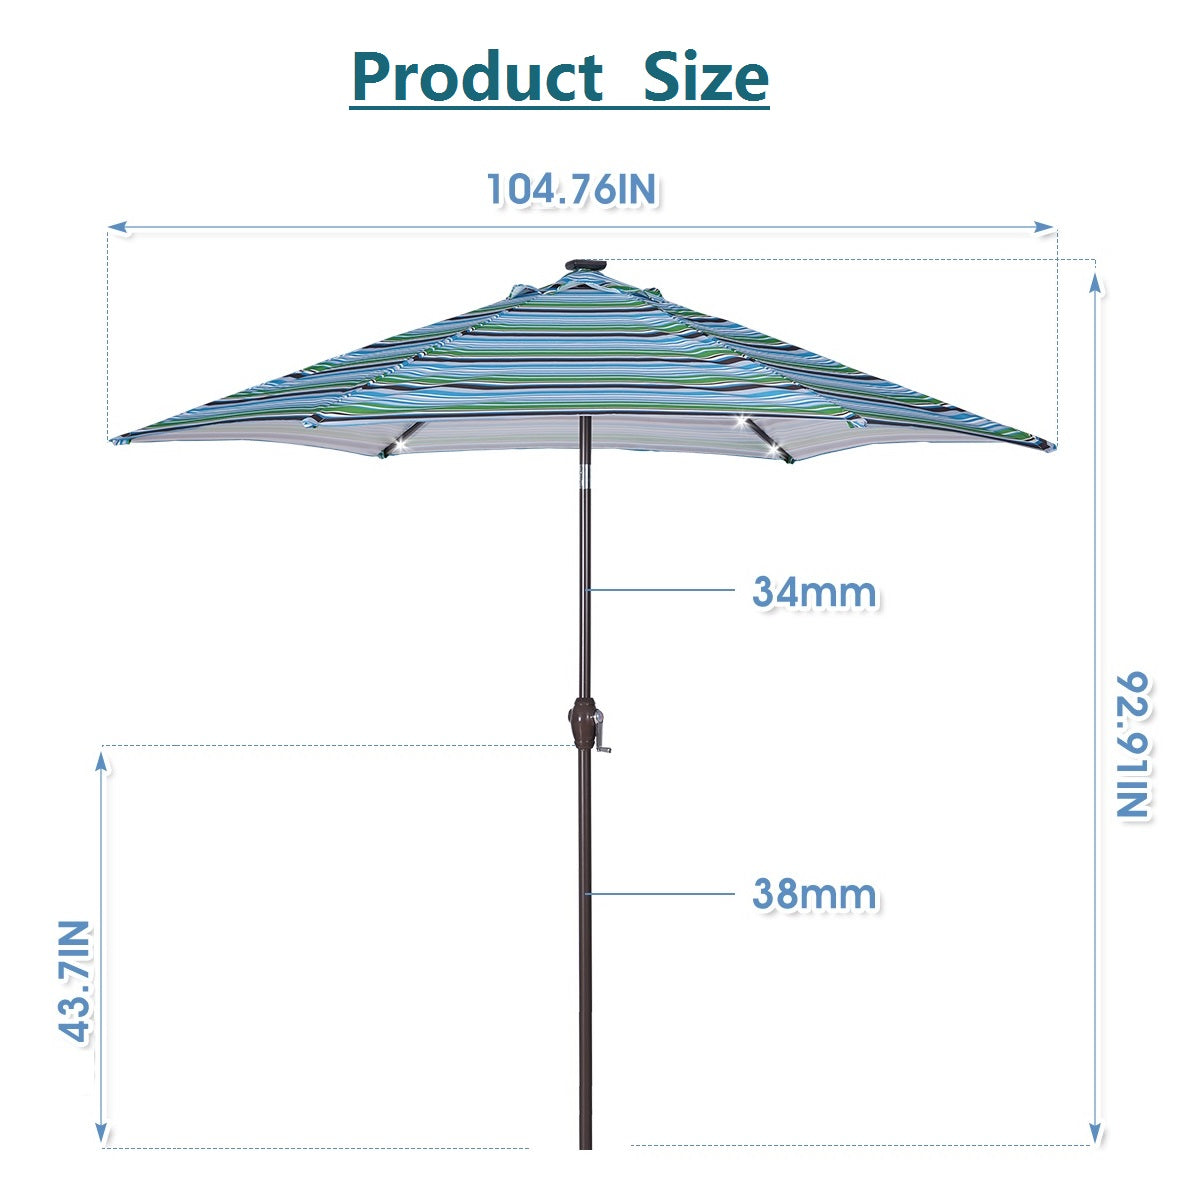 Andoer Outdoor Patio 8.7-Feet Market Table Umbrella with Push Button Tilt and Crank, Blue Stripes With 24 [Umbrella Base is not Included]